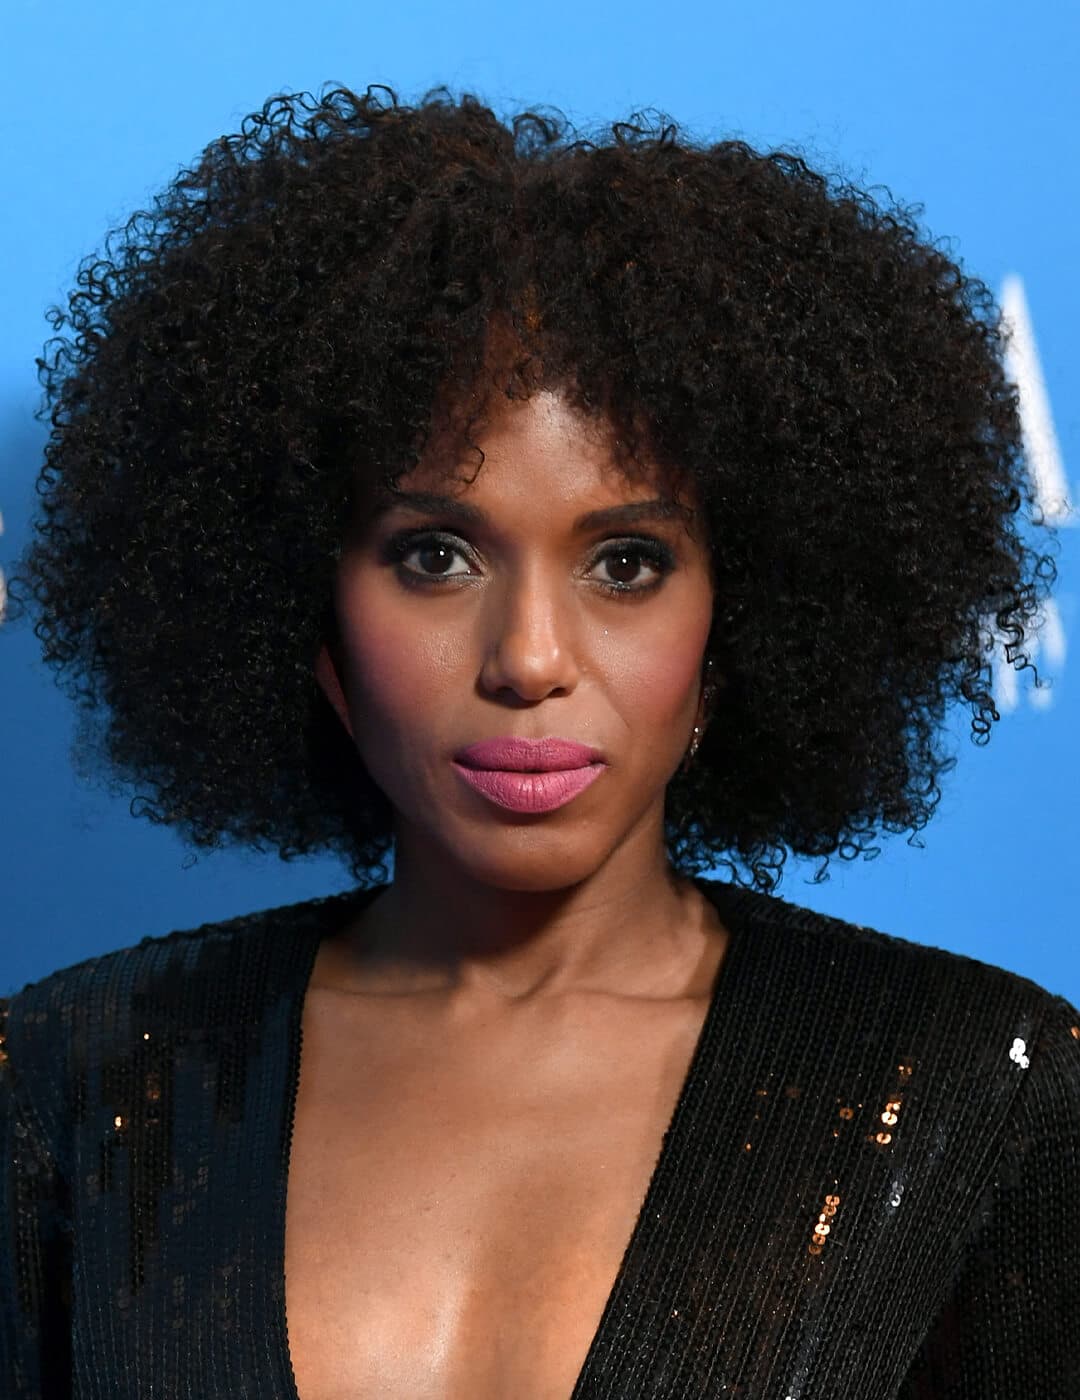 Close-up of Kerry Washington in a black sequined dress rocking an afro against blue background